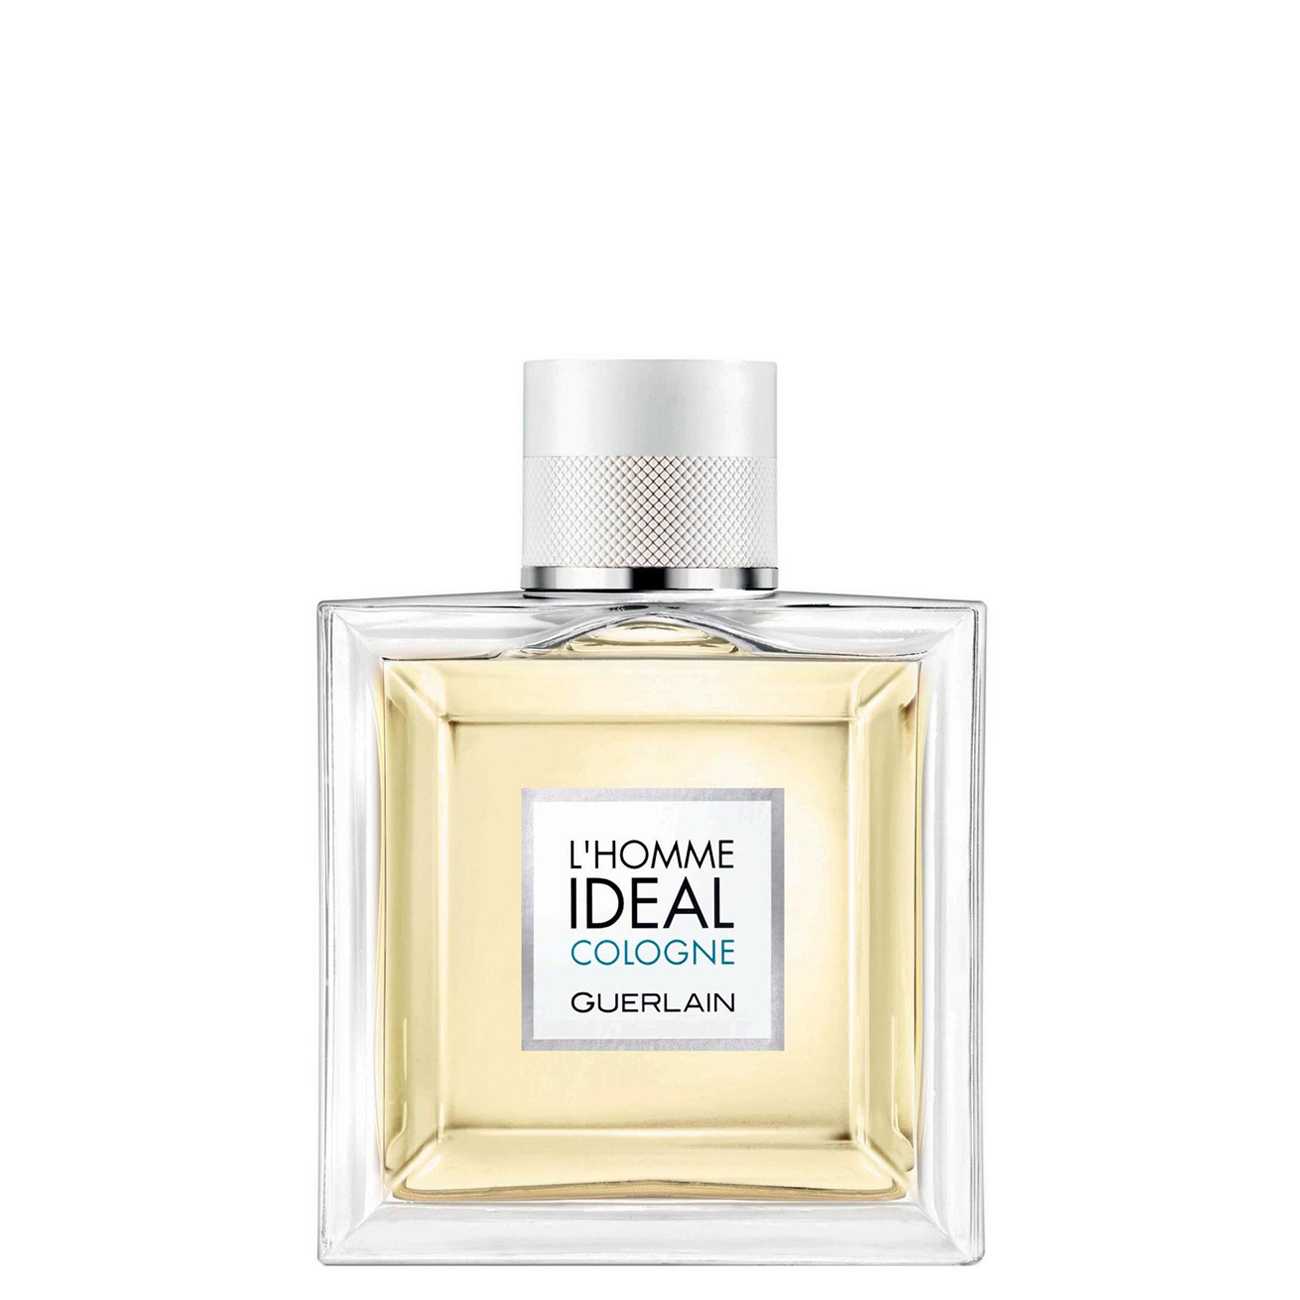 L’HOMME IDEAL 50ml 50ml